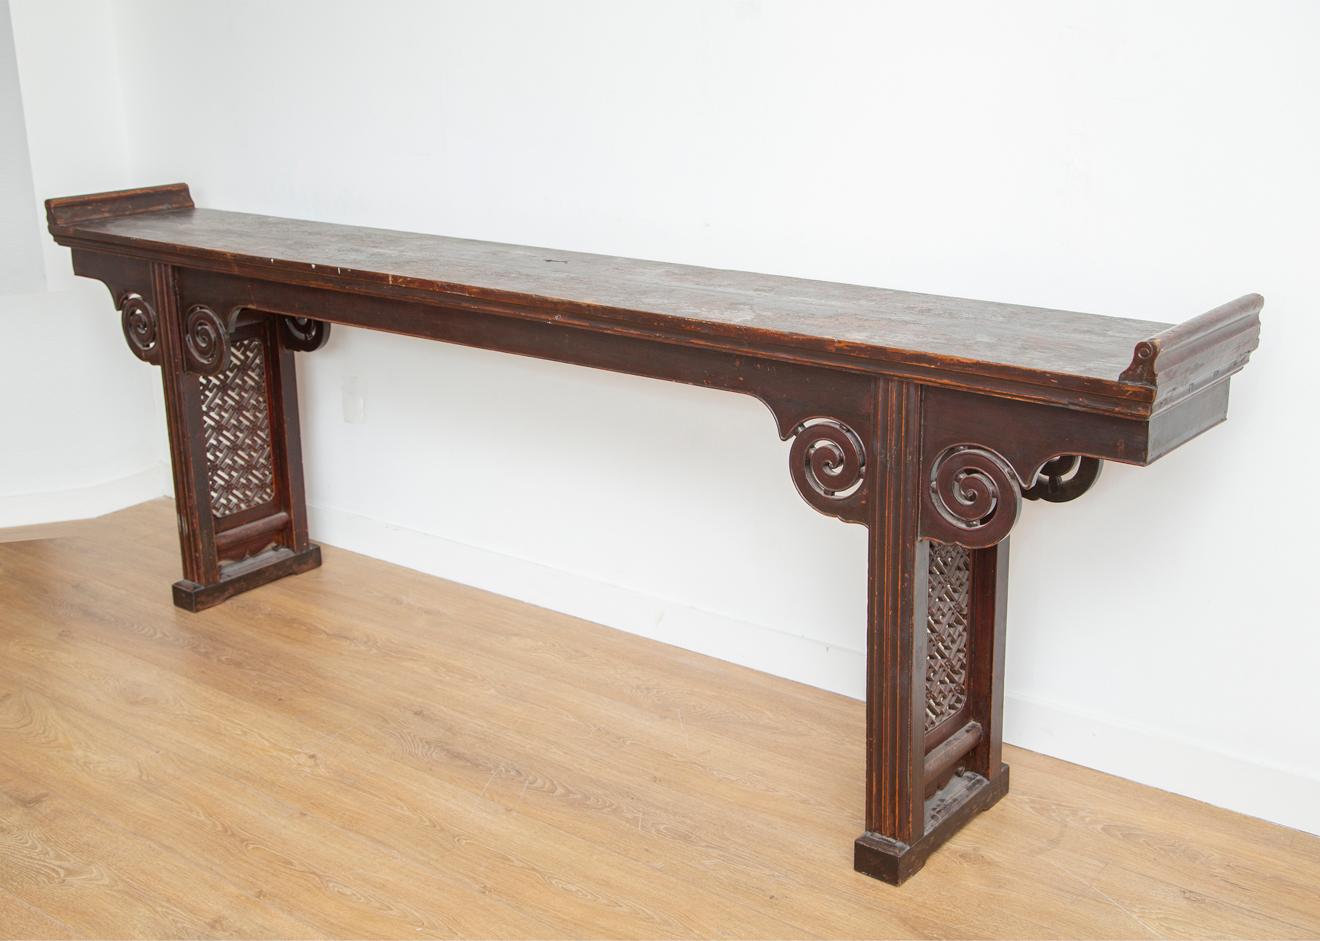 Large and narrow Chinese altar console, 20th century
Scrolling and geometrical motifs
Nicely distressed patina, with dark red/burgundy hue
We love the proportions, perfect for an entrance, foyer
Available to view in situ in our Miami showroom.